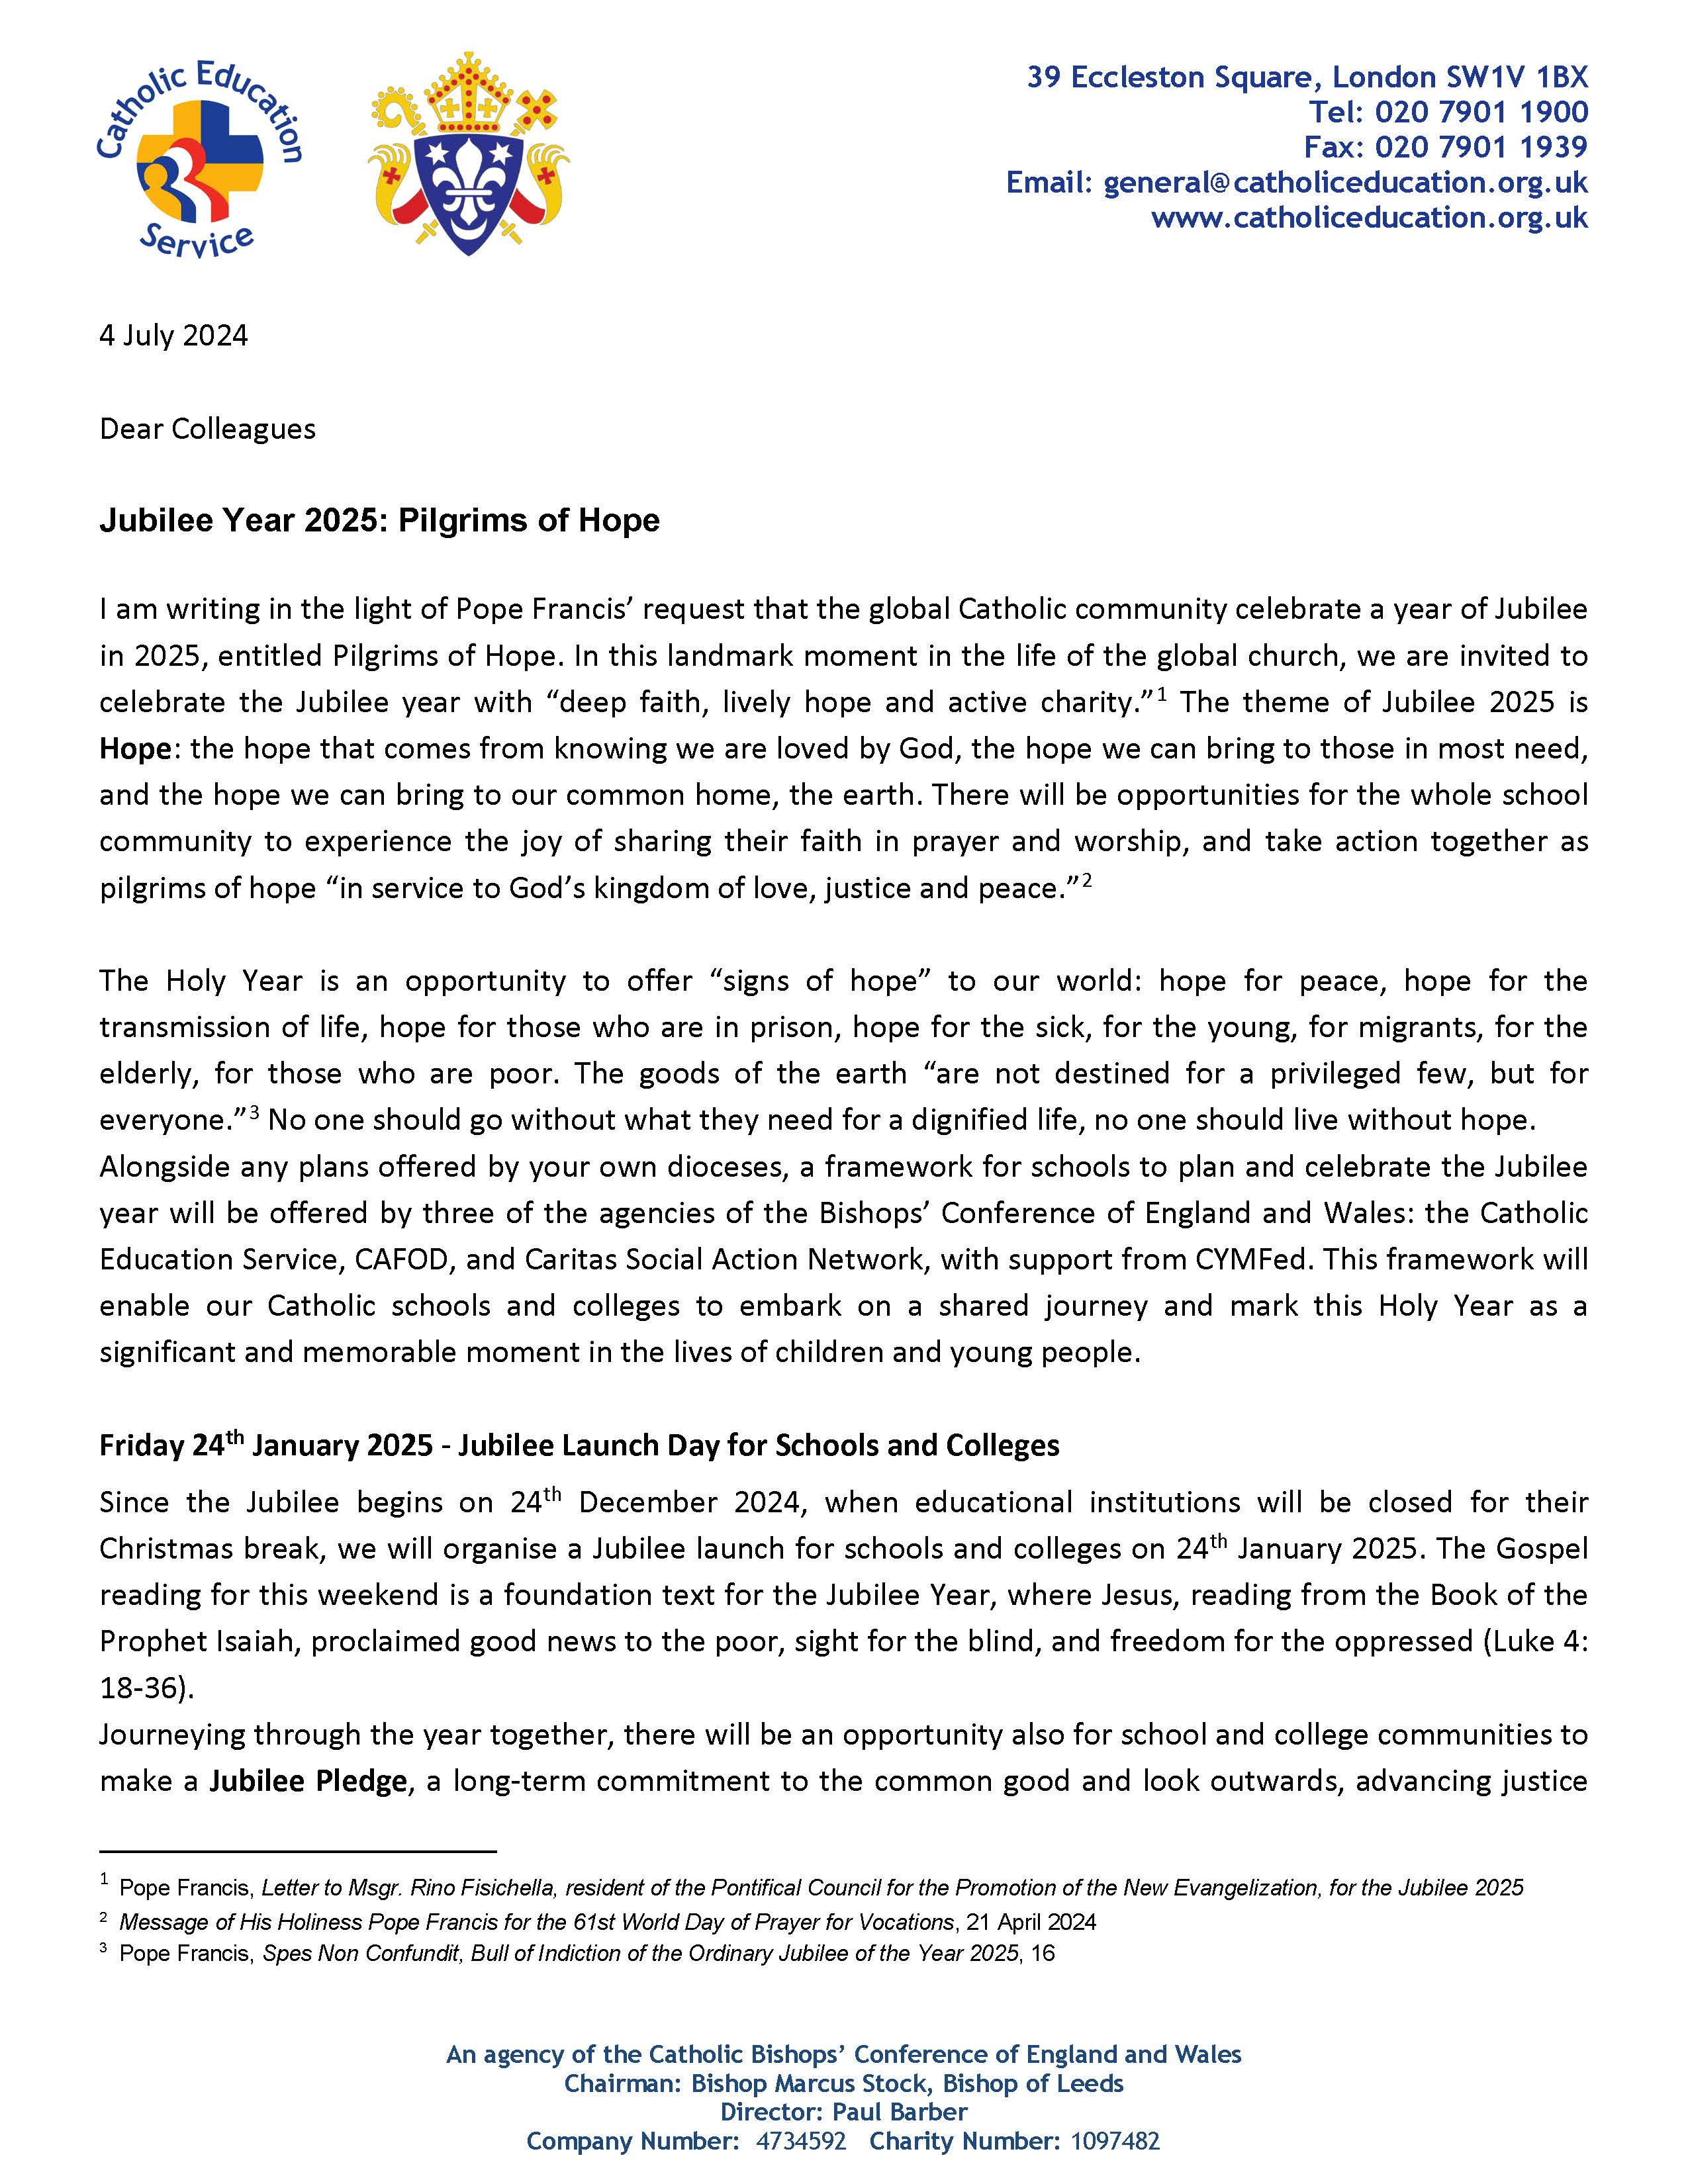 85.24 Jubilee Year 2025 Pilgrims of Hope letter from Bishop Marcus Stock Page 1